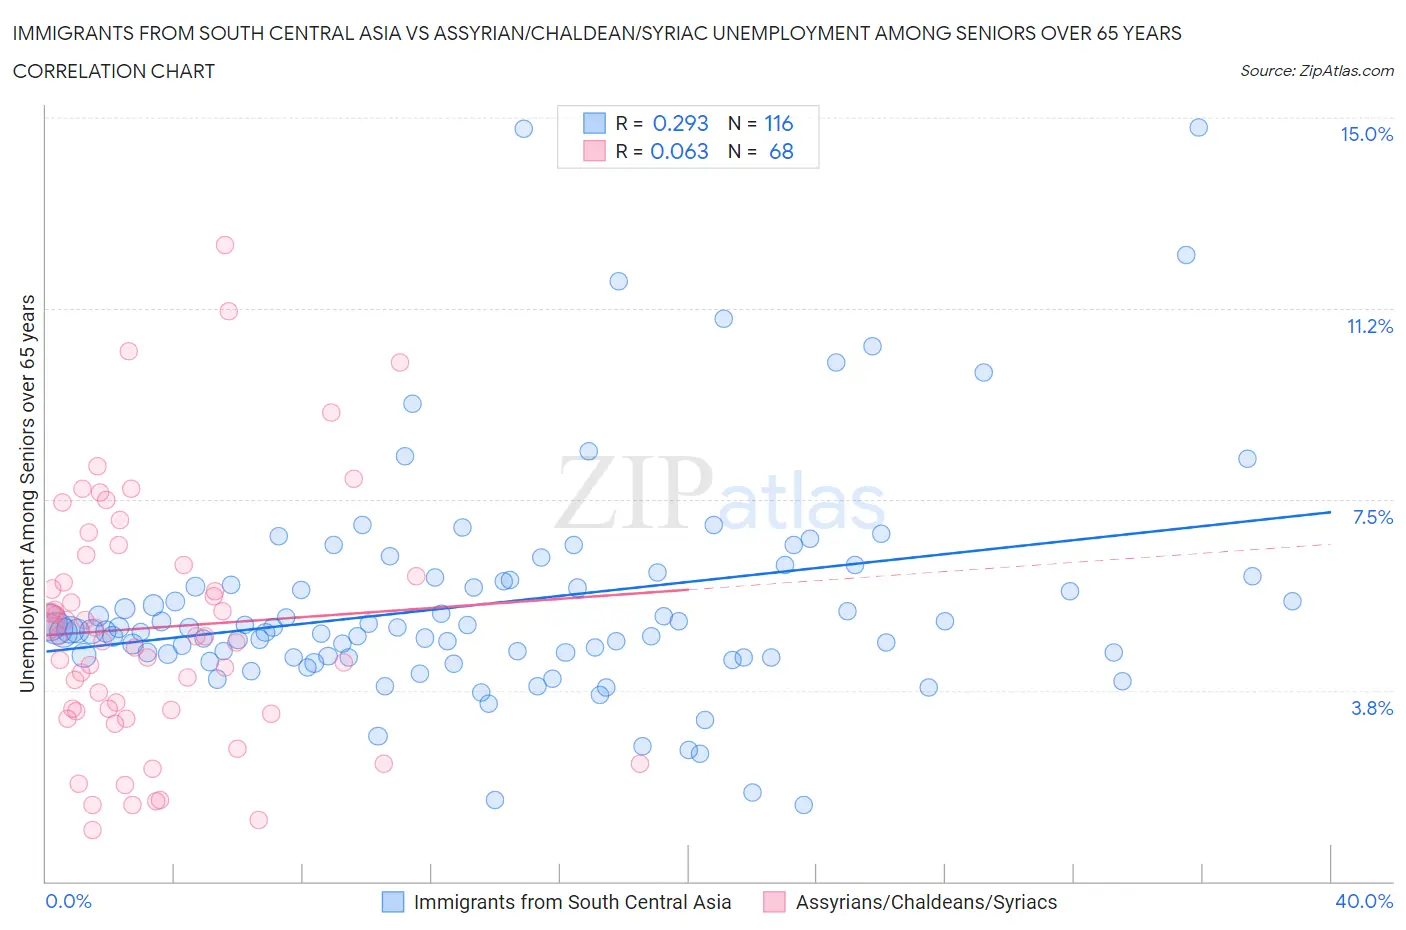 Immigrants from South Central Asia vs Assyrian/Chaldean/Syriac Unemployment Among Seniors over 65 years